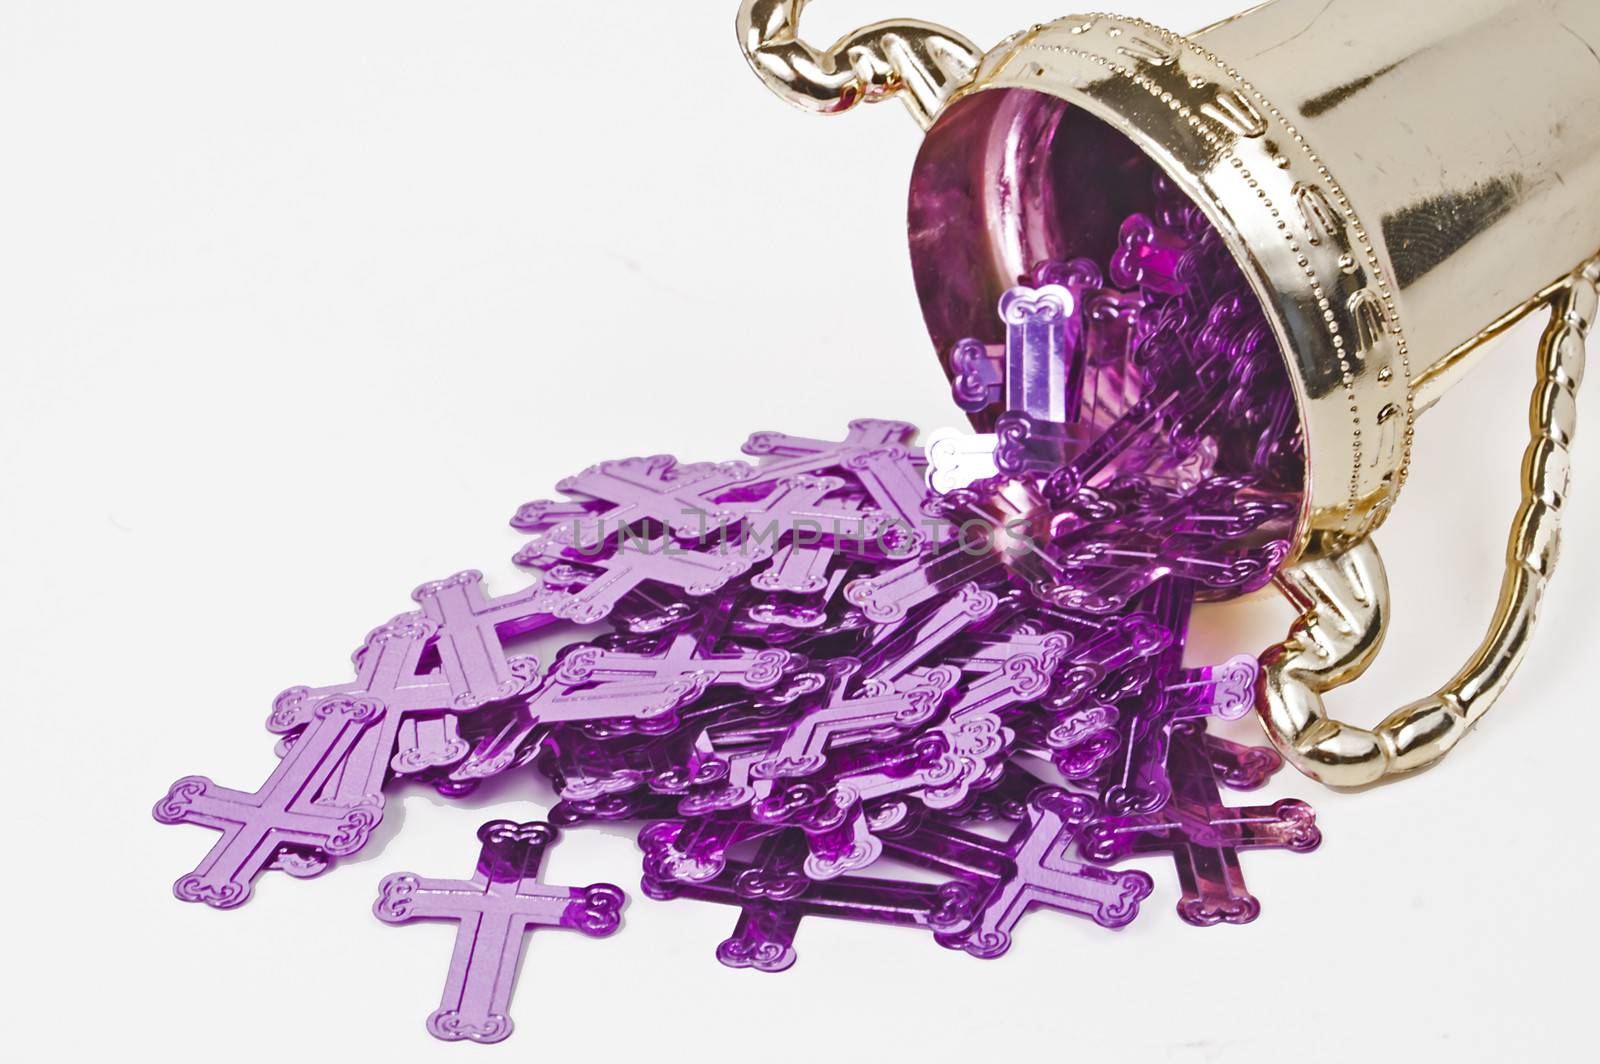 Purple crosses spill out of a gold chalice.